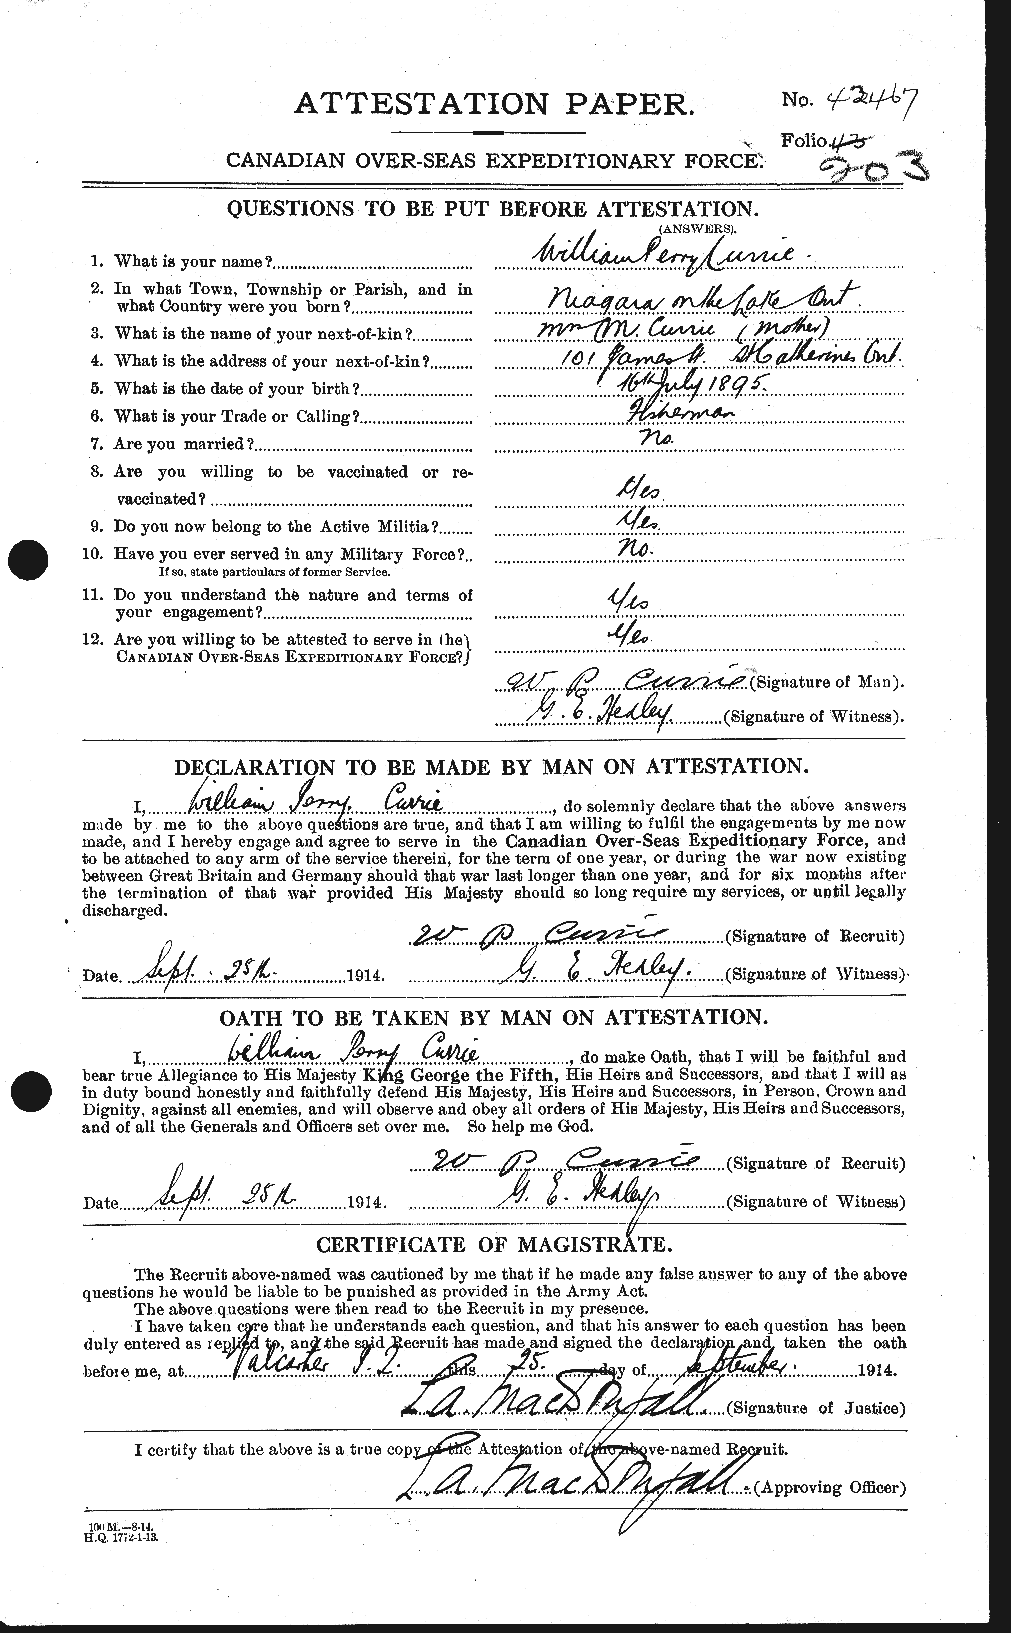 Personnel Records of the First World War - CEF 071439a